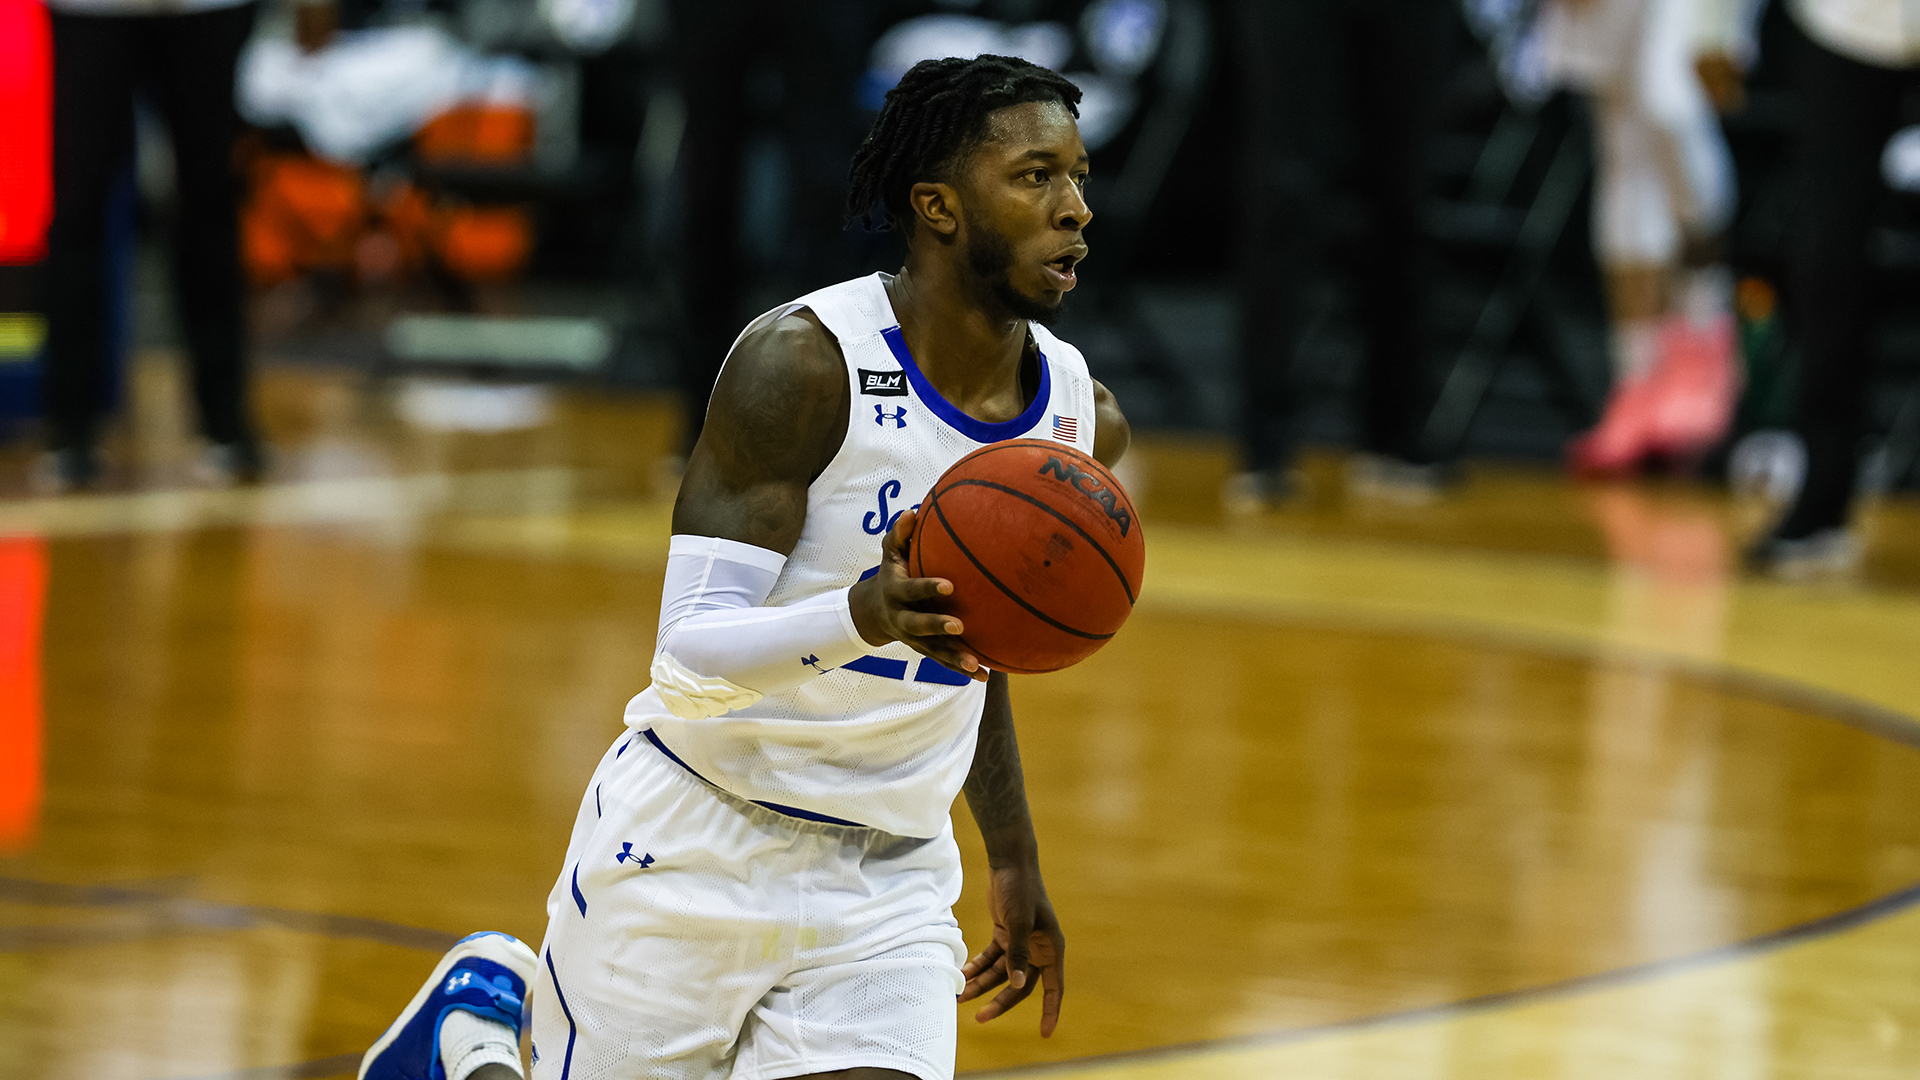 Myles Cale dribbles the ball in the open floor during a Seton Hall basketball game.